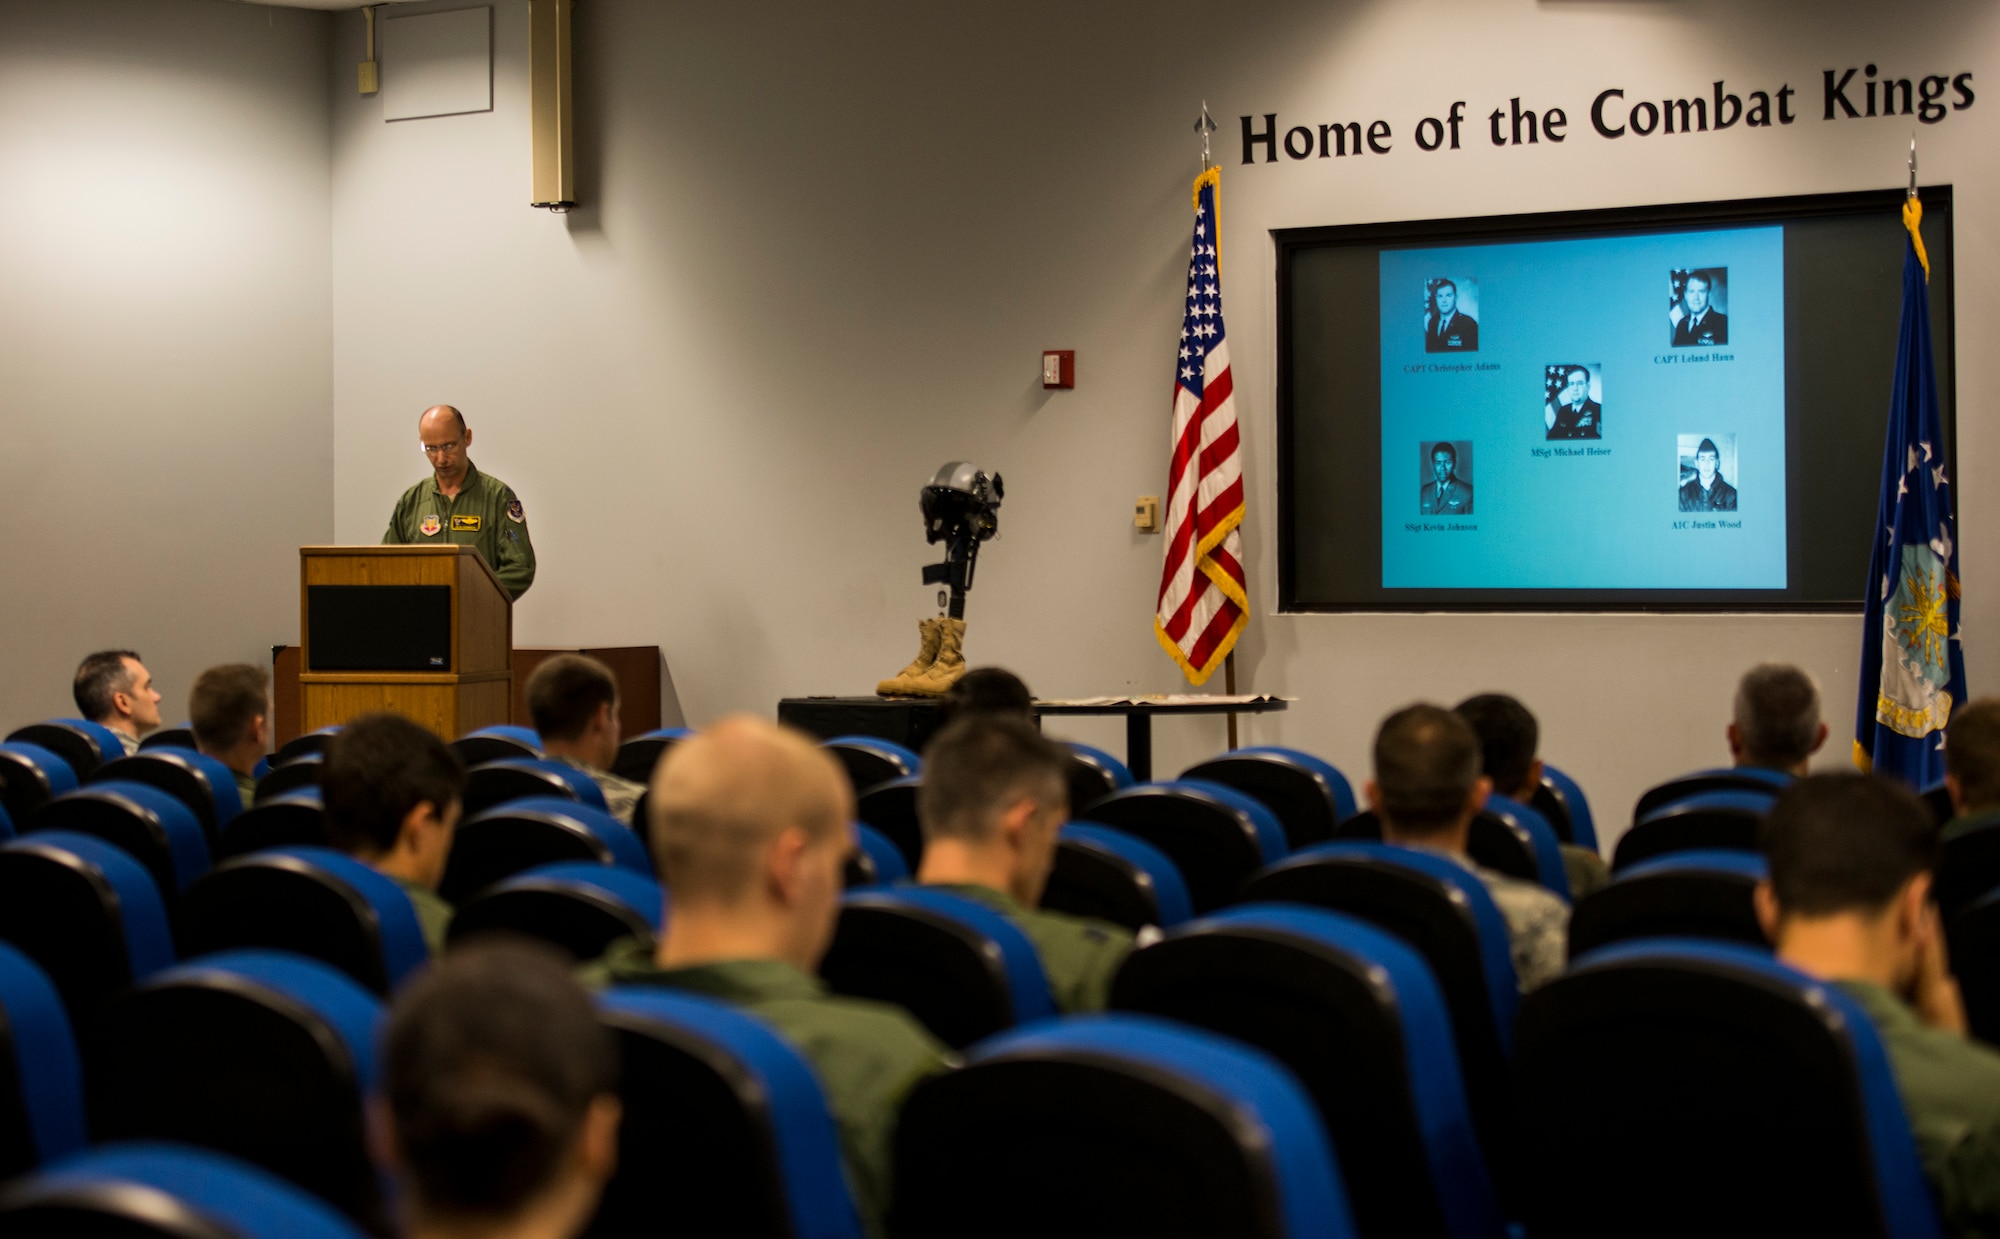 U.S. Air Force Lt. Col. Peter Dominicis, 347th Rescue Group deputy commander, speaks to attendees during a Khobar Towers Remembrance ceremony at Moody Air Force Base, Ga., June 25, 2014. During the Khobar Towers attack, opposing forces detonated a tanker truck near an eight-story building which housed deployed personnel from the 4411th Rescue Squadron. The bombing resulted in the death of 19 service members including five rescue Airmen: Capt. Christopher Adams, Capt. Leland Haun, Master Sgt, Michael Heiser, Staff Sgt. Kevin Johnson and Airman 1st Class Justin Wood. (U.S. Air Force photo by Senior Airman Douglas Ellis/Released)
